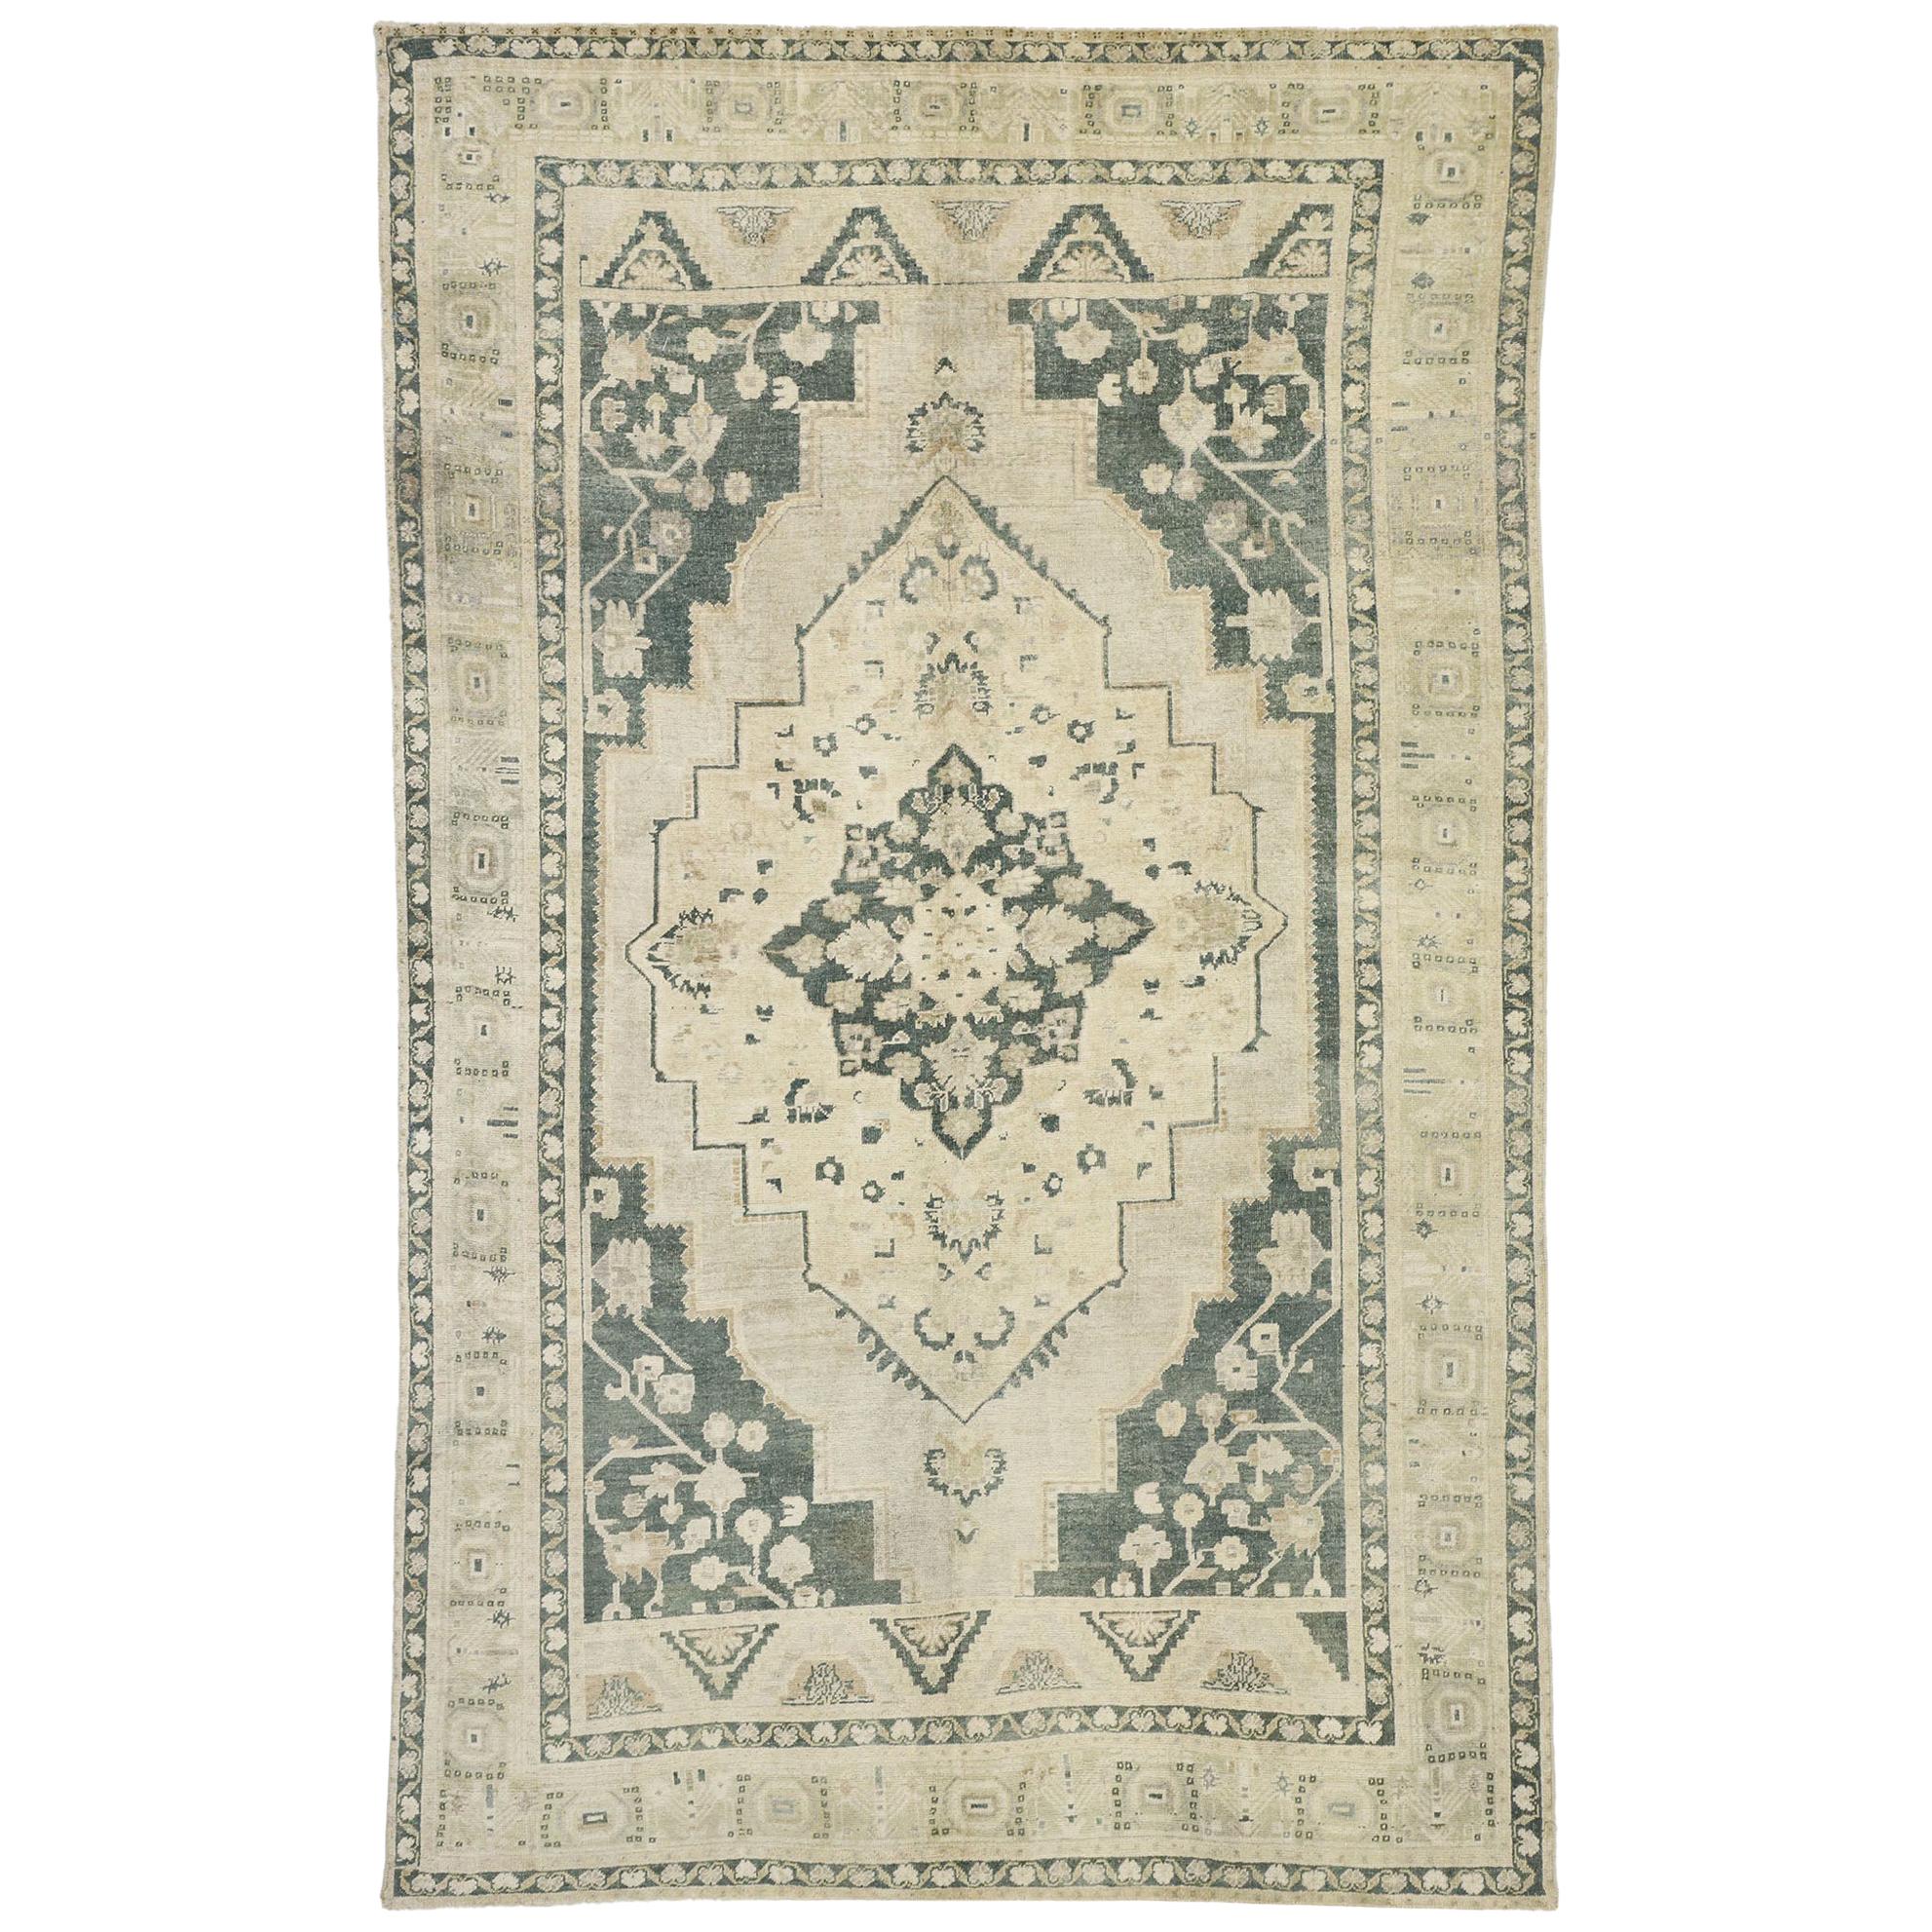 Vintage Turkish Oushak Gallery Rug with Colonial Shaker Style